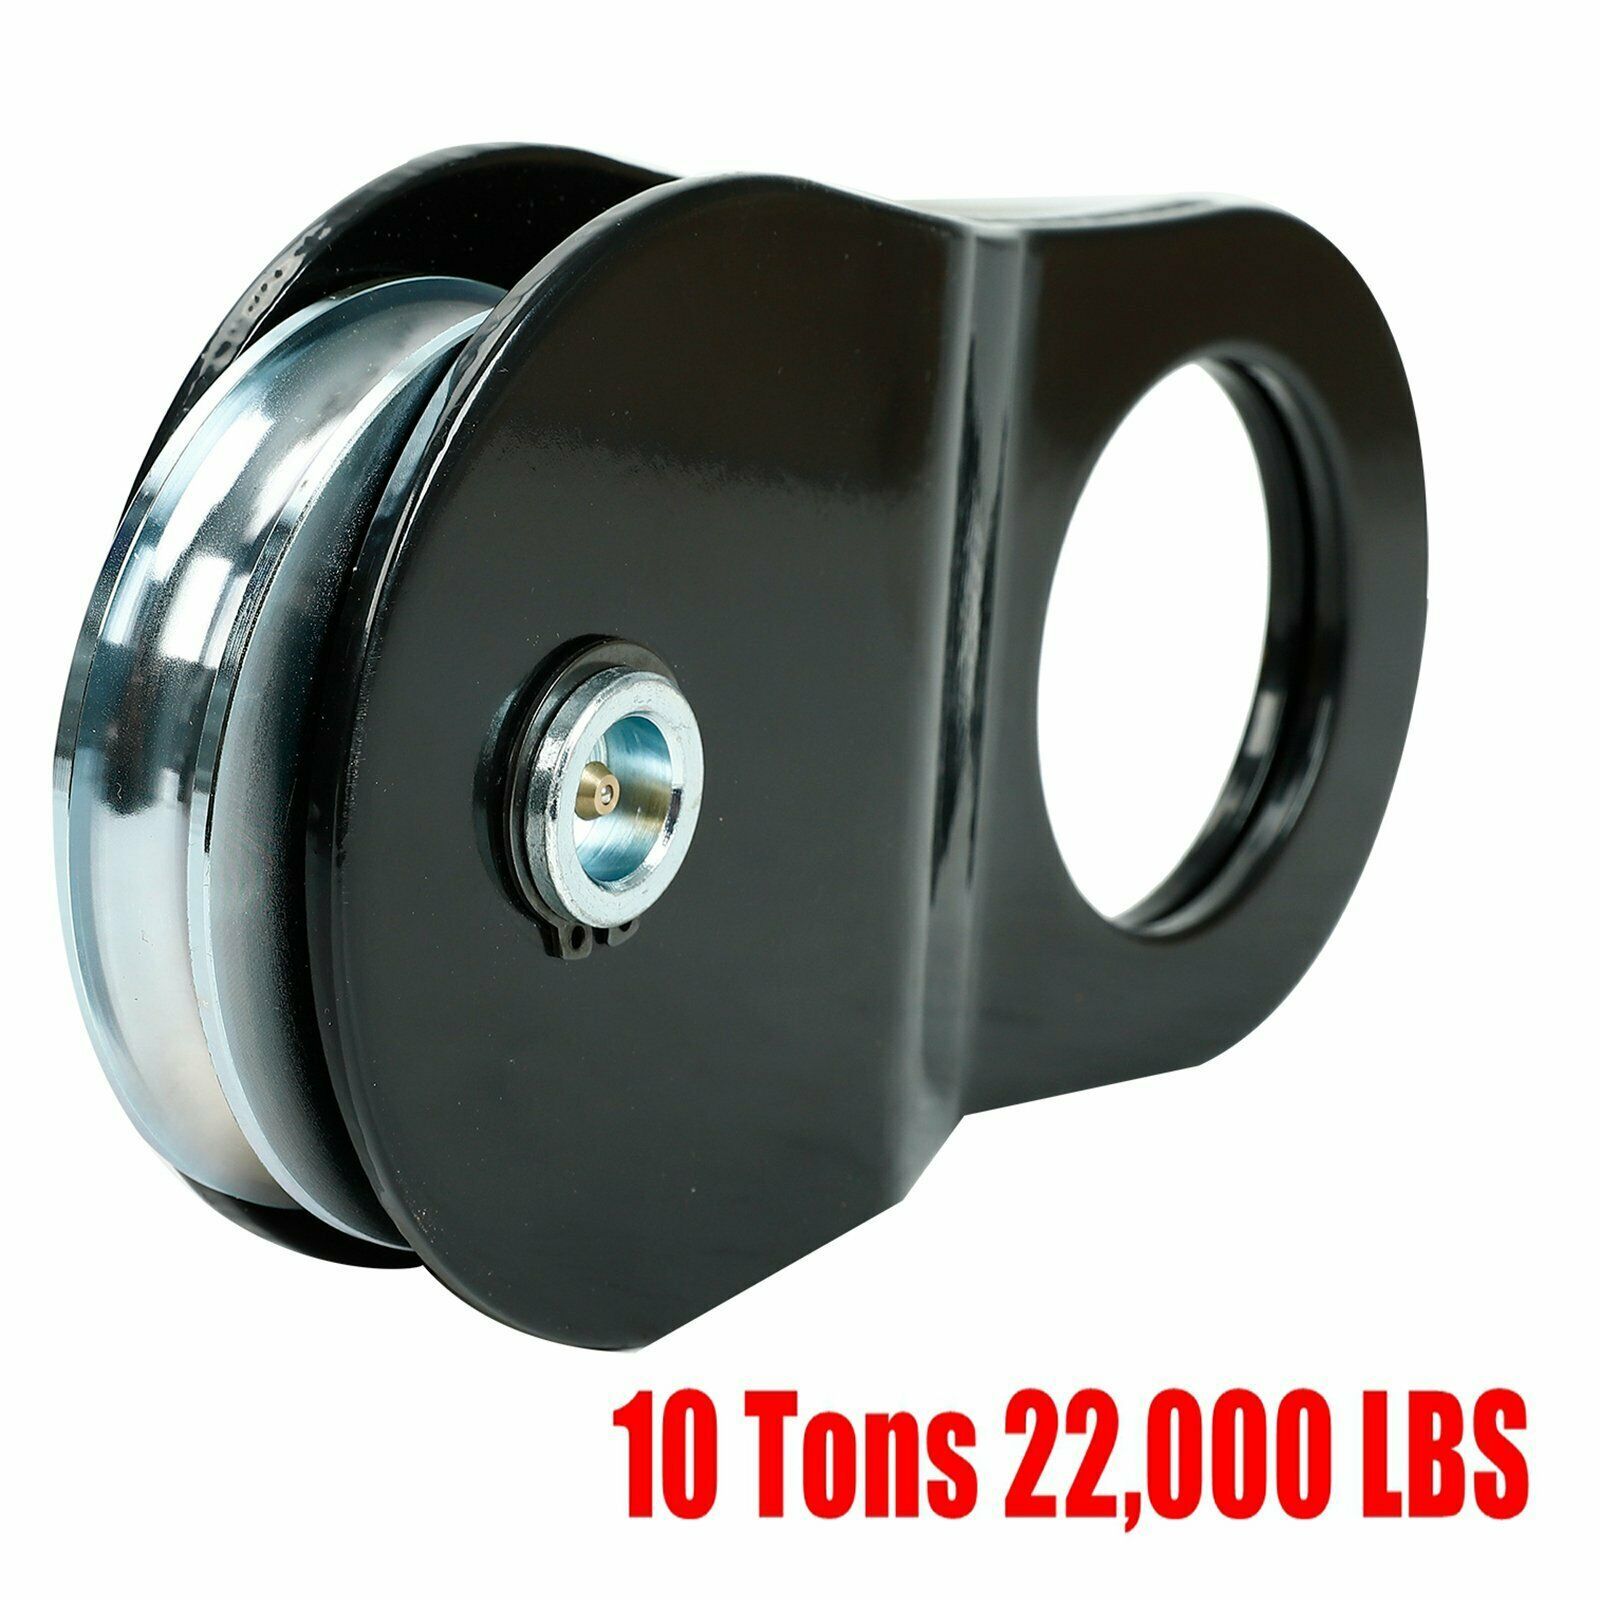 10 Ton Recover Vehicle Winch Pulley 22,000 LBS Capacity Snatch Block Black